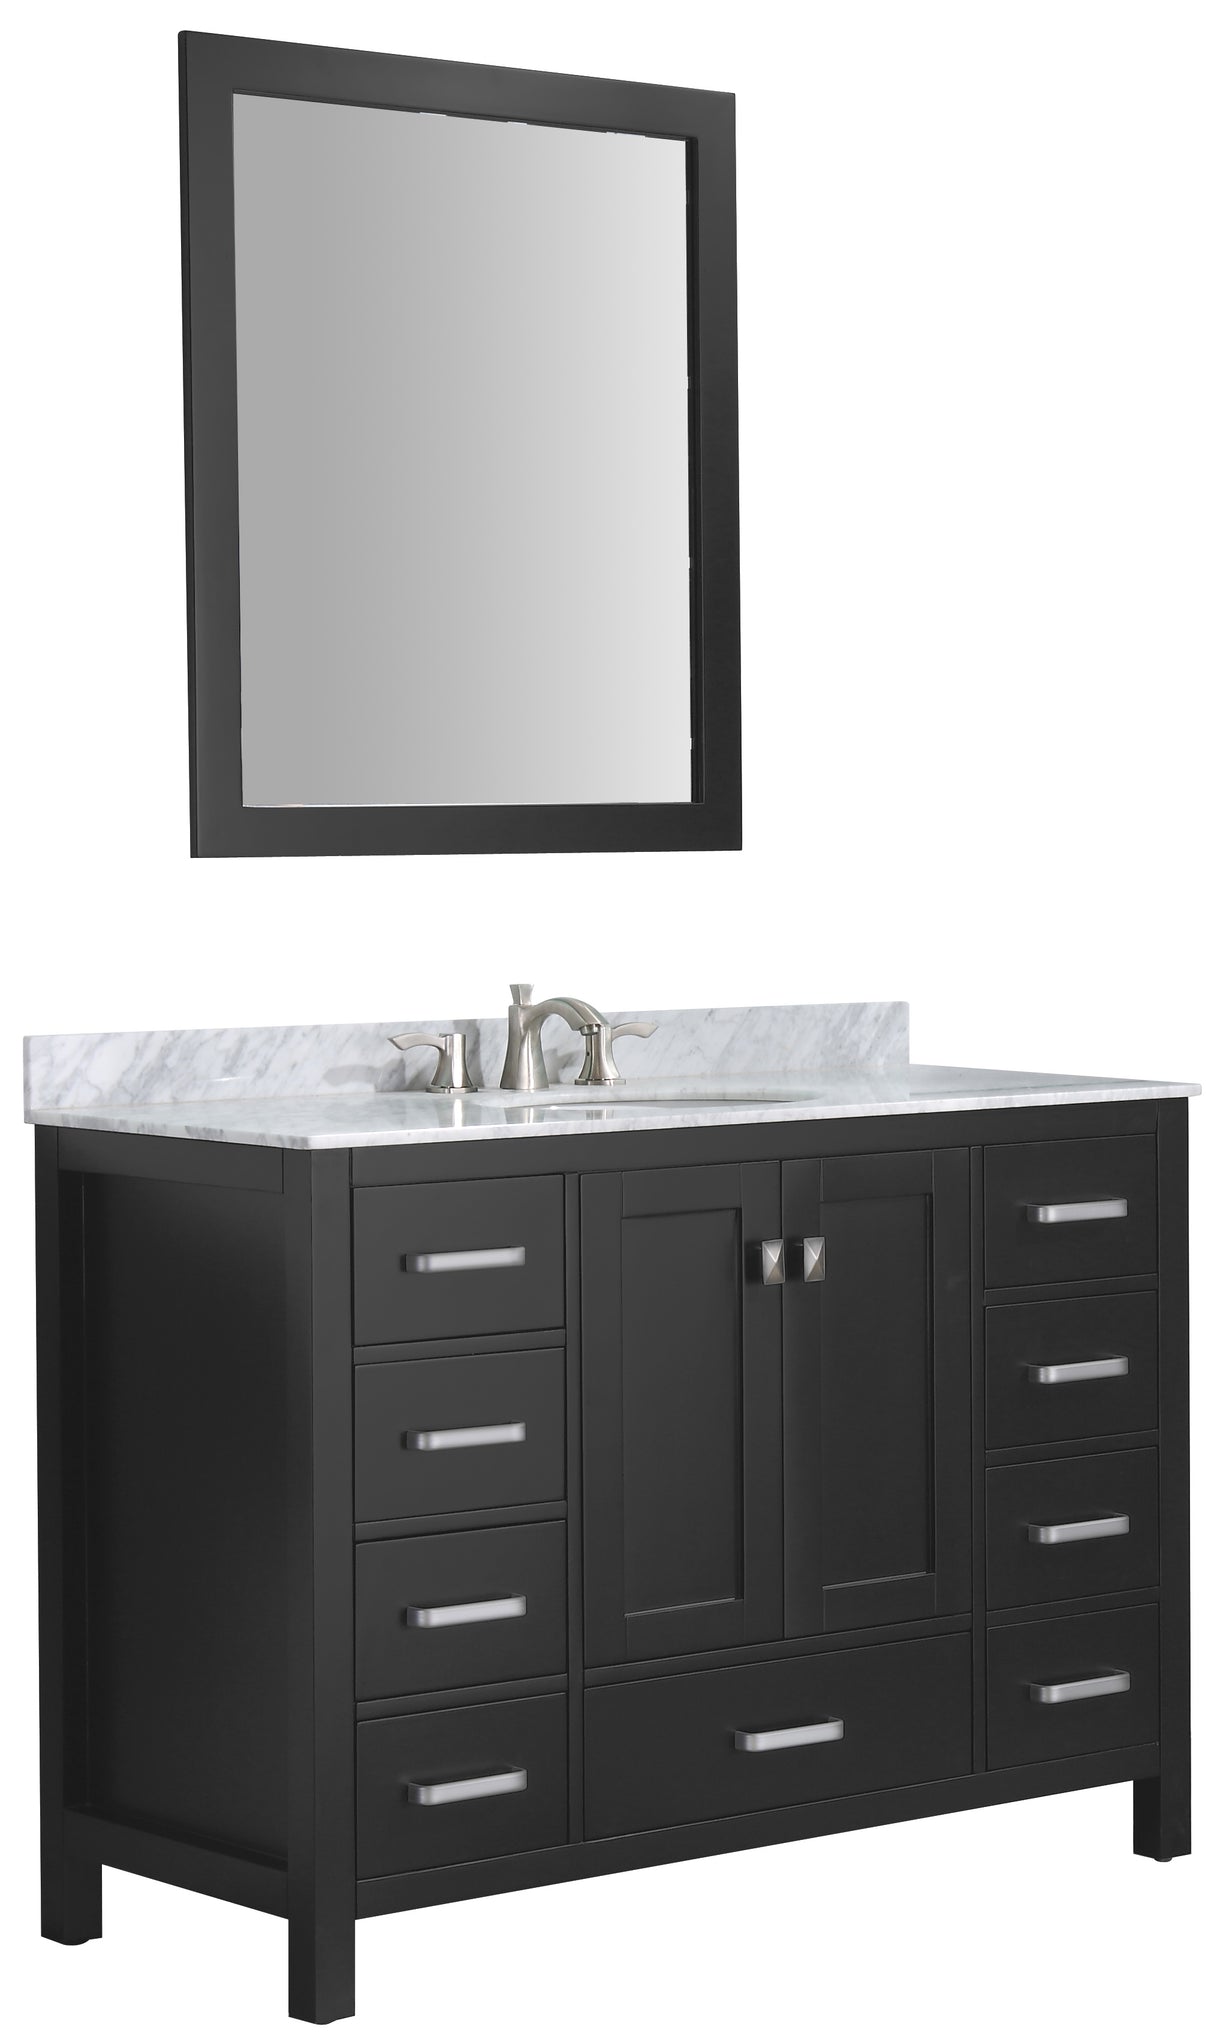 ANZZI VT-MRCT0048-BK Chateau 48 in. W x 22 in. D Bathroom Bath Vanity Set in Black with Carrara Marble Top with White Sink